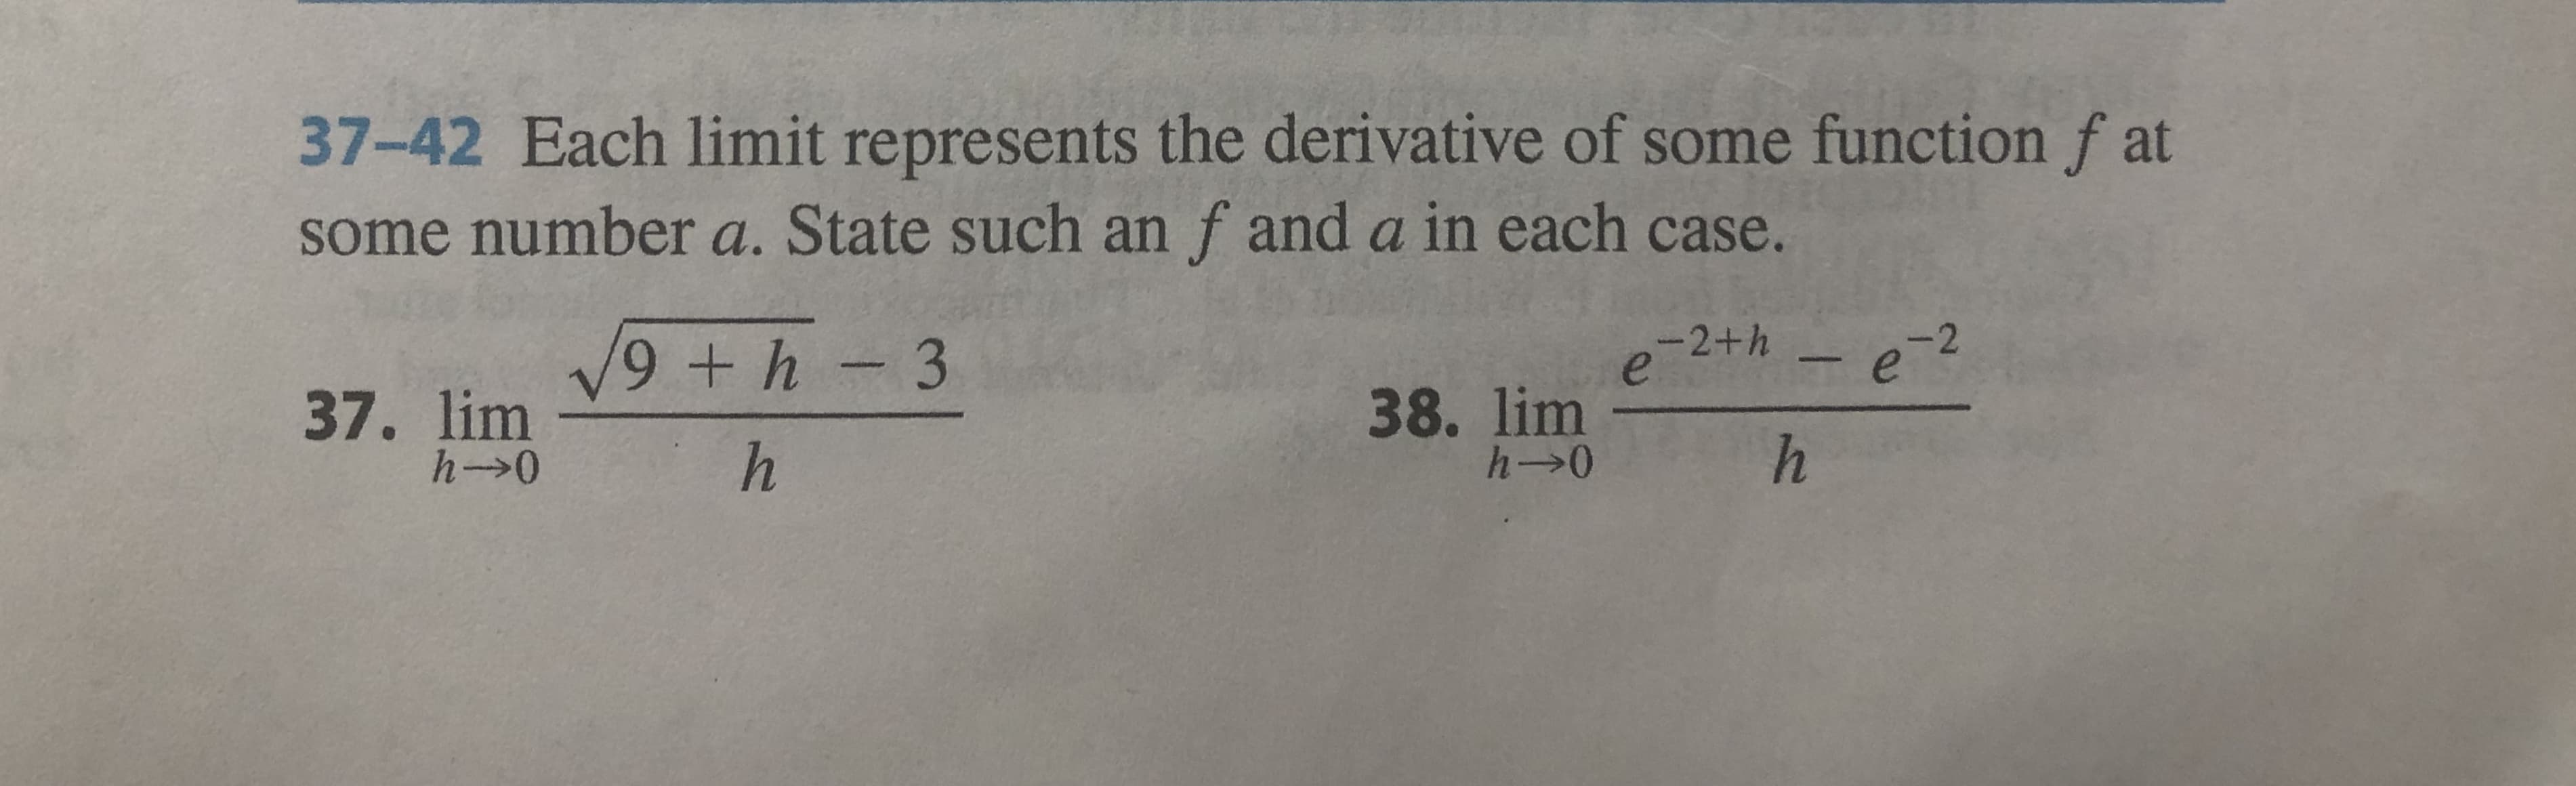 37-42 Each limit represents the derivative of some function f at
some number a. State such anf and a in each case.
-2+h-e2
9 + h-3
e
38. lim
h-0
37. lim
h-0
h
h
